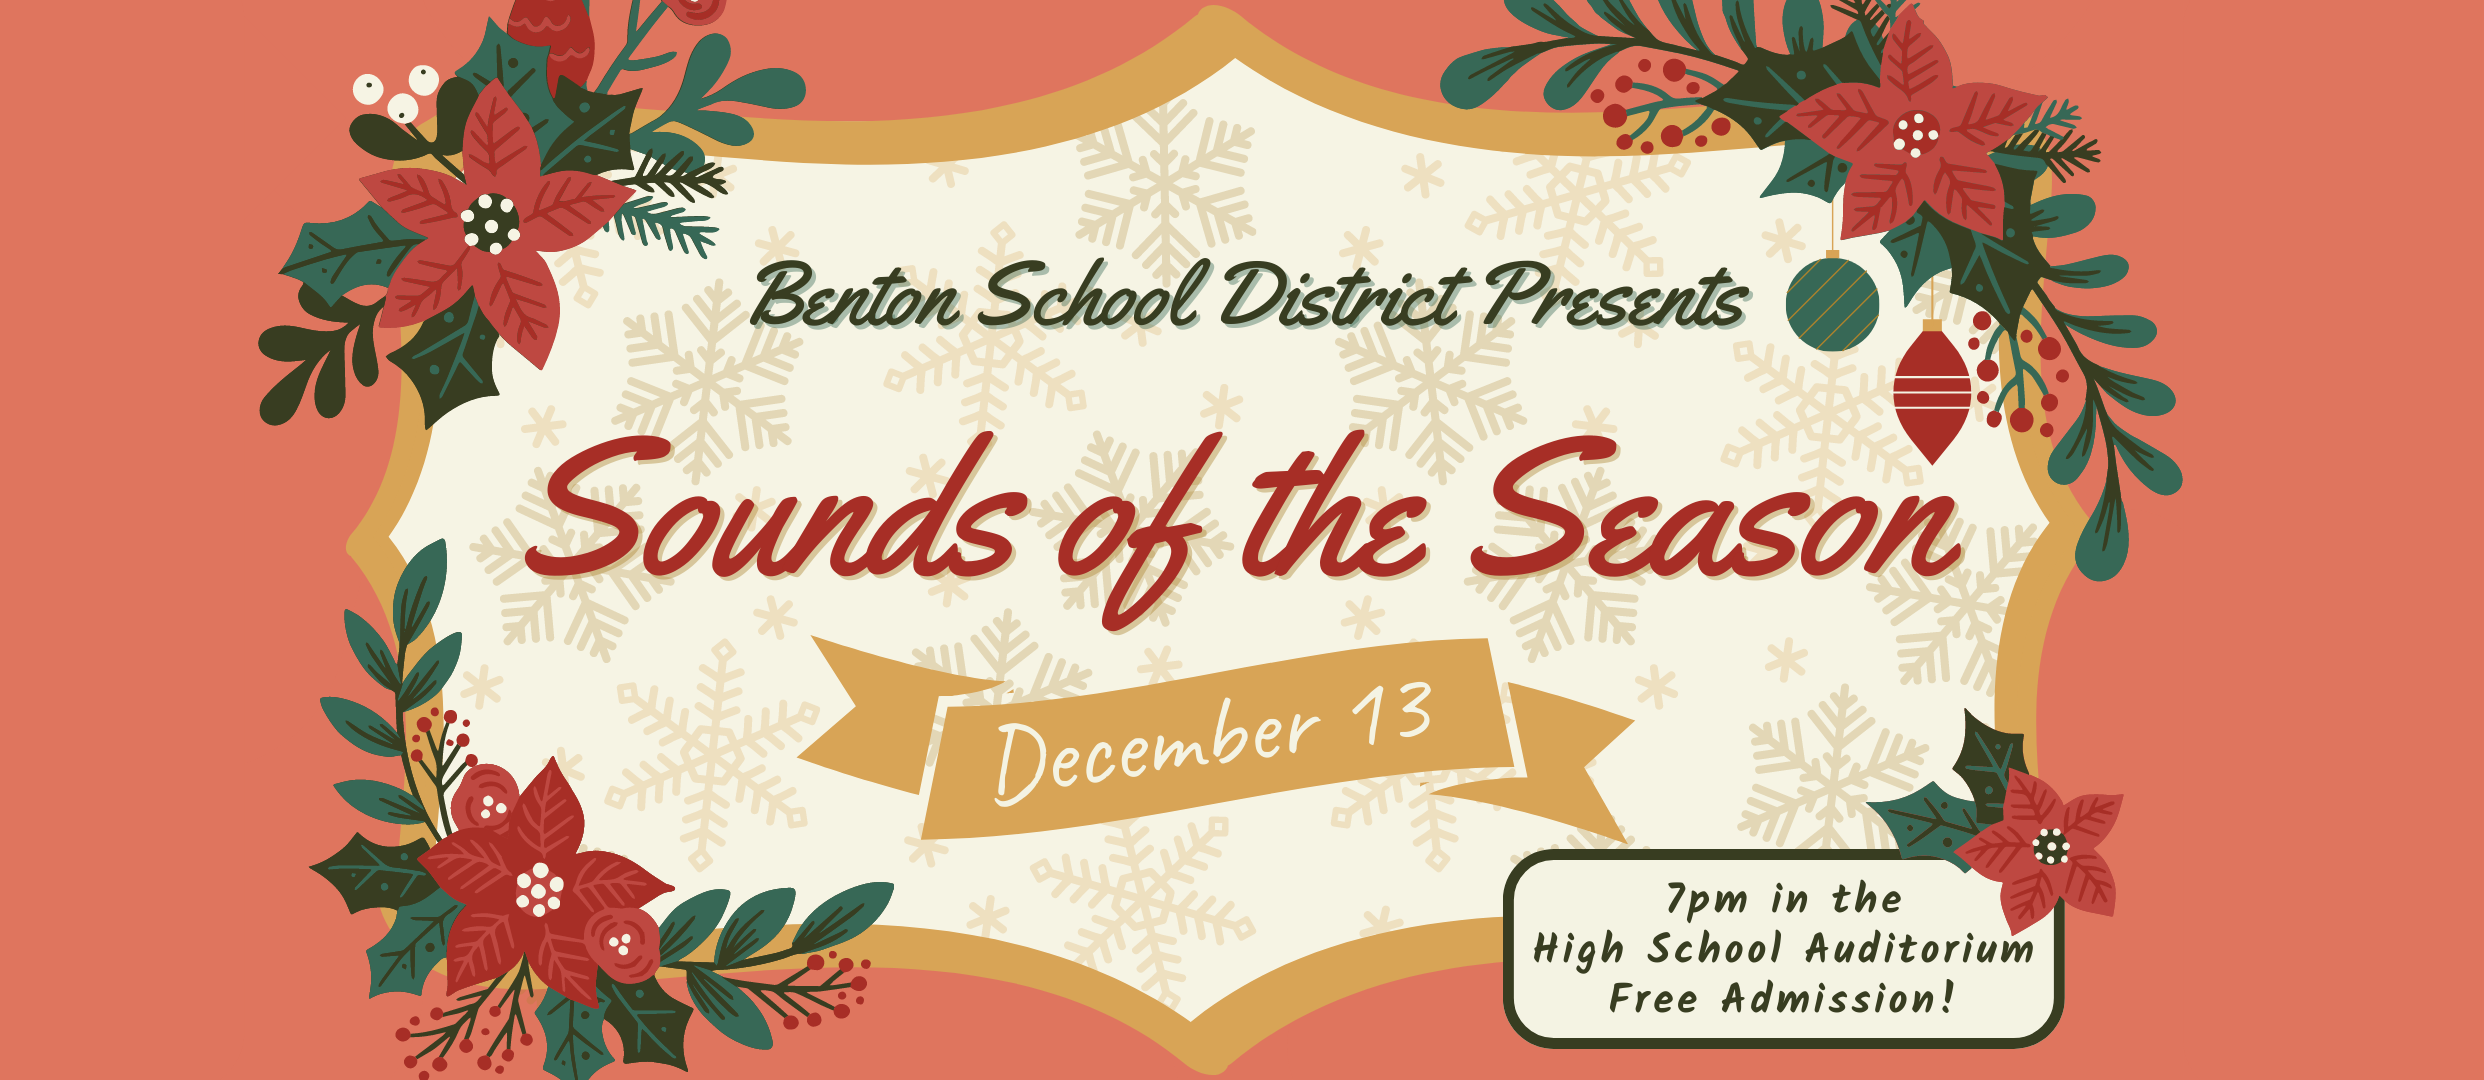 Sounds of the Season Concert - December 13th at 7pm in the High School Auditorium. Admission is free.